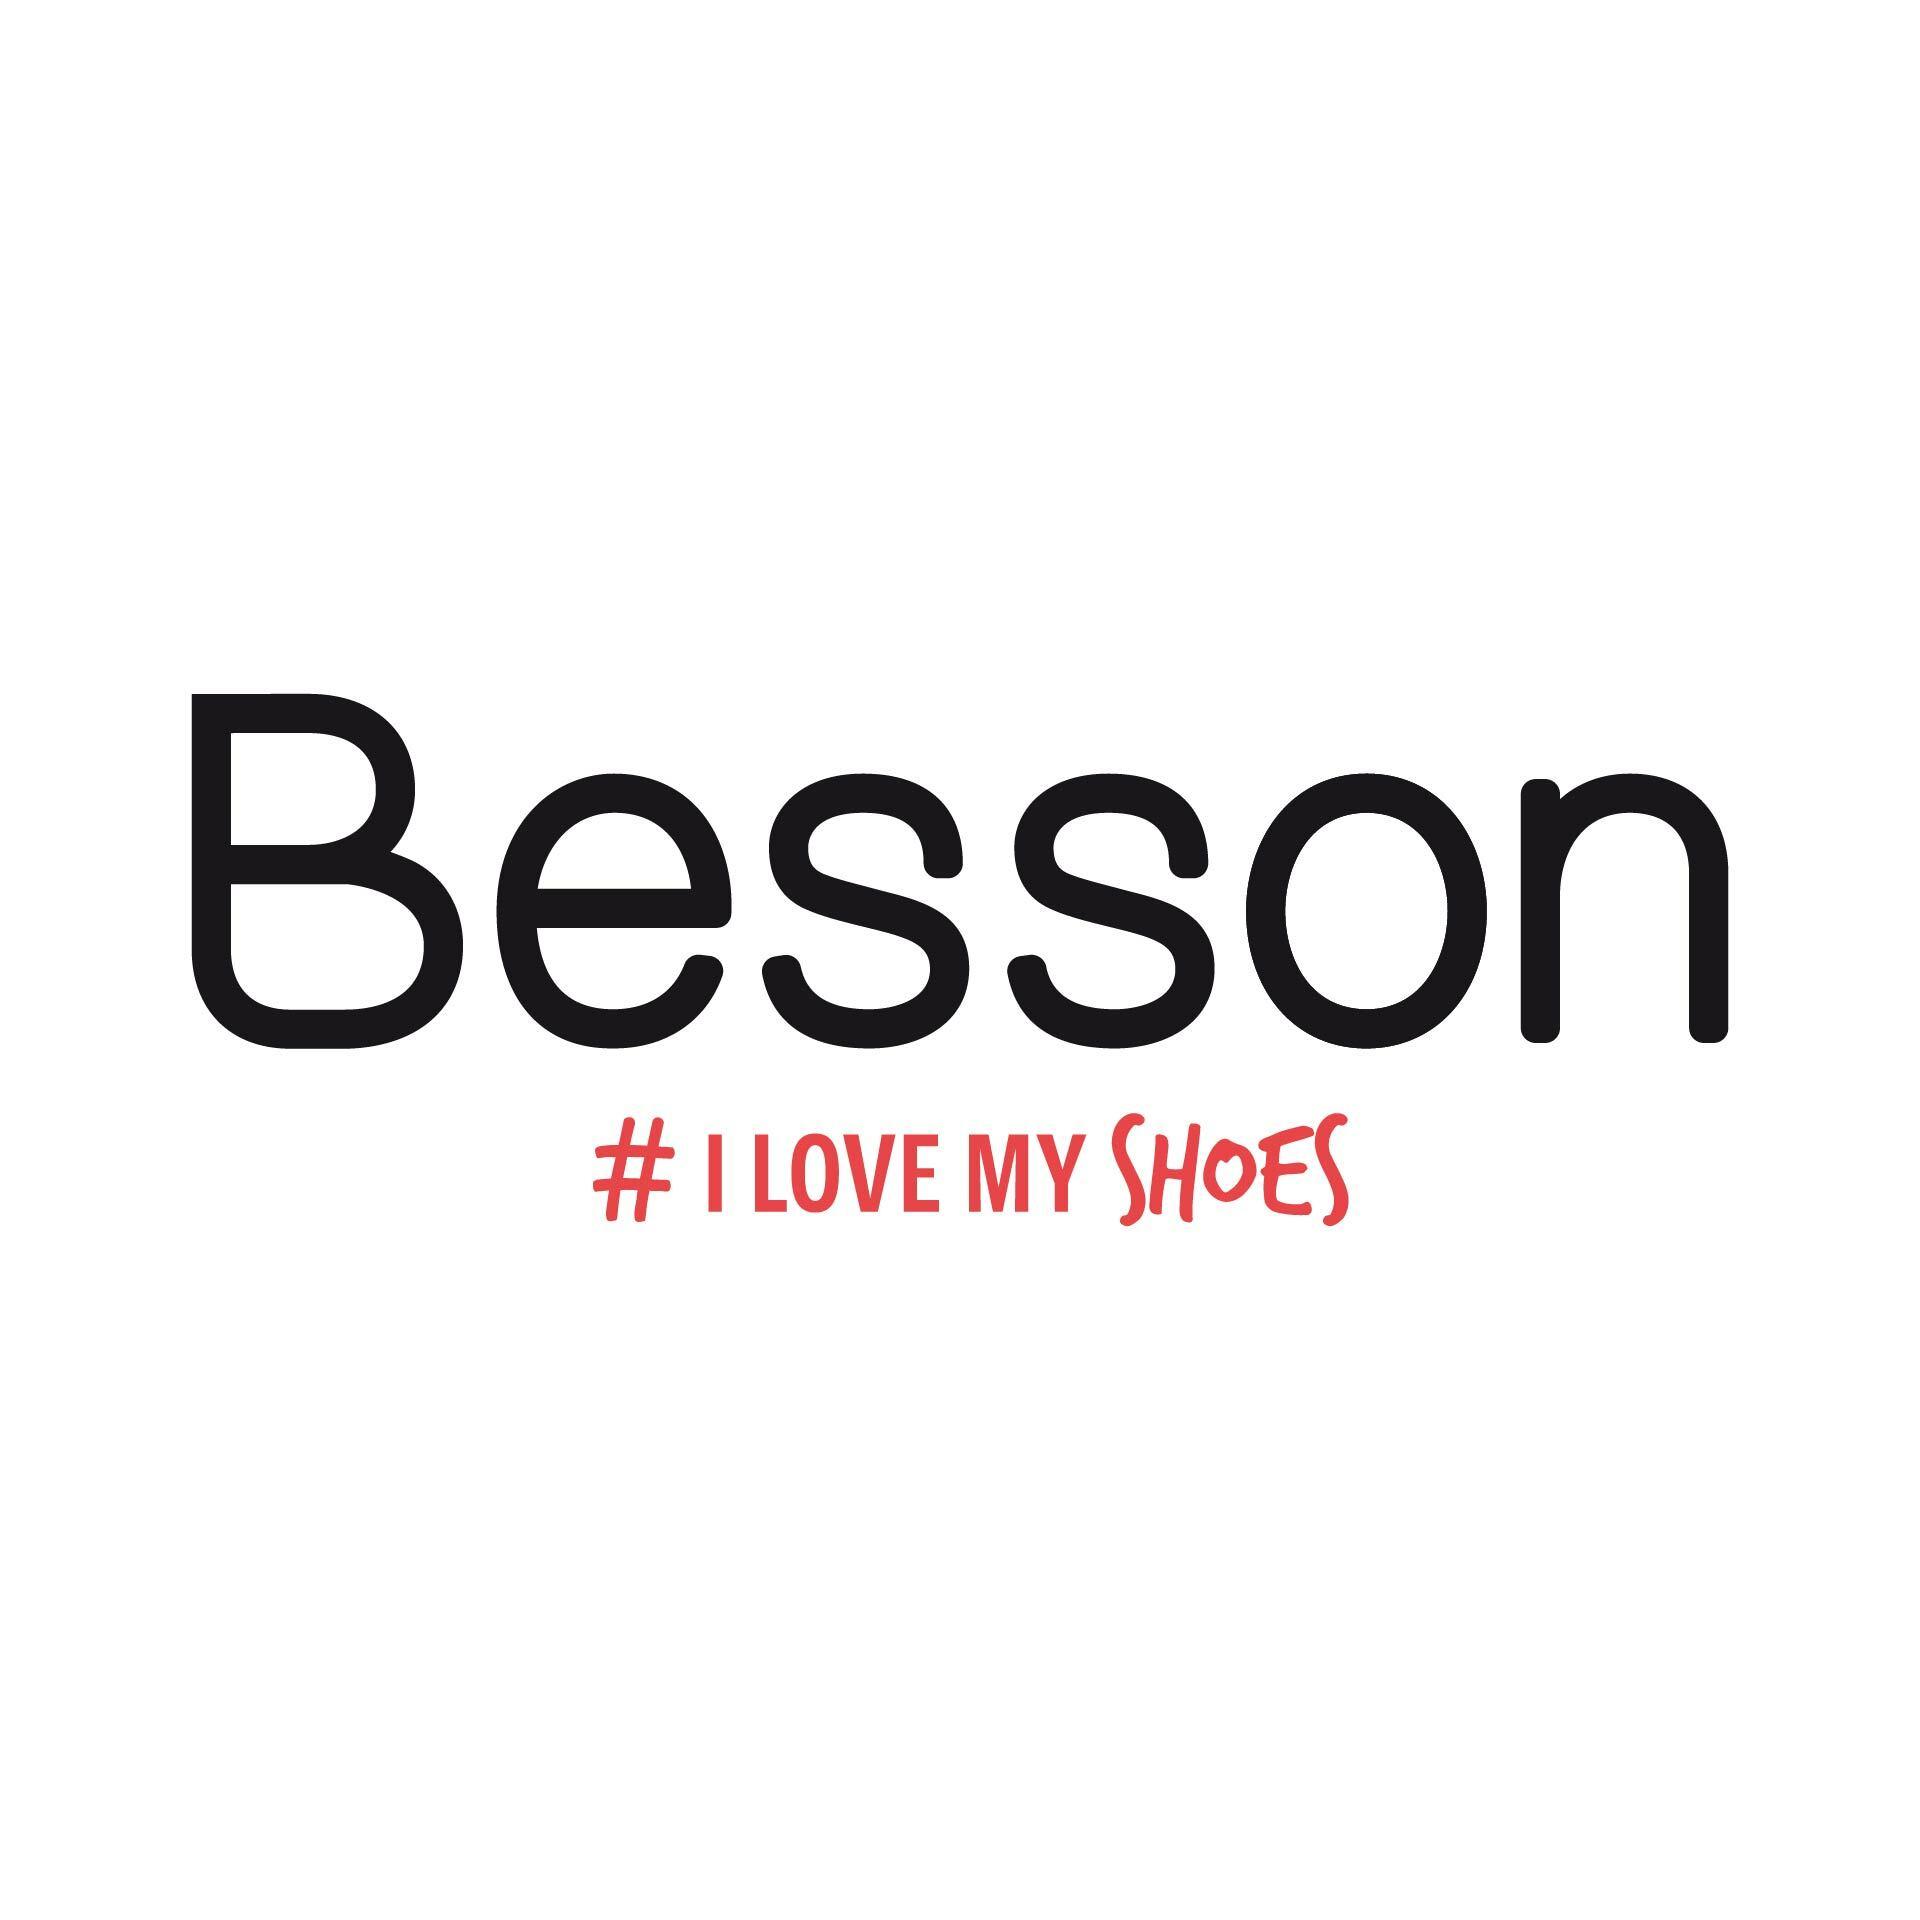 Besson Chaussures Grenoble Crolles Crolles